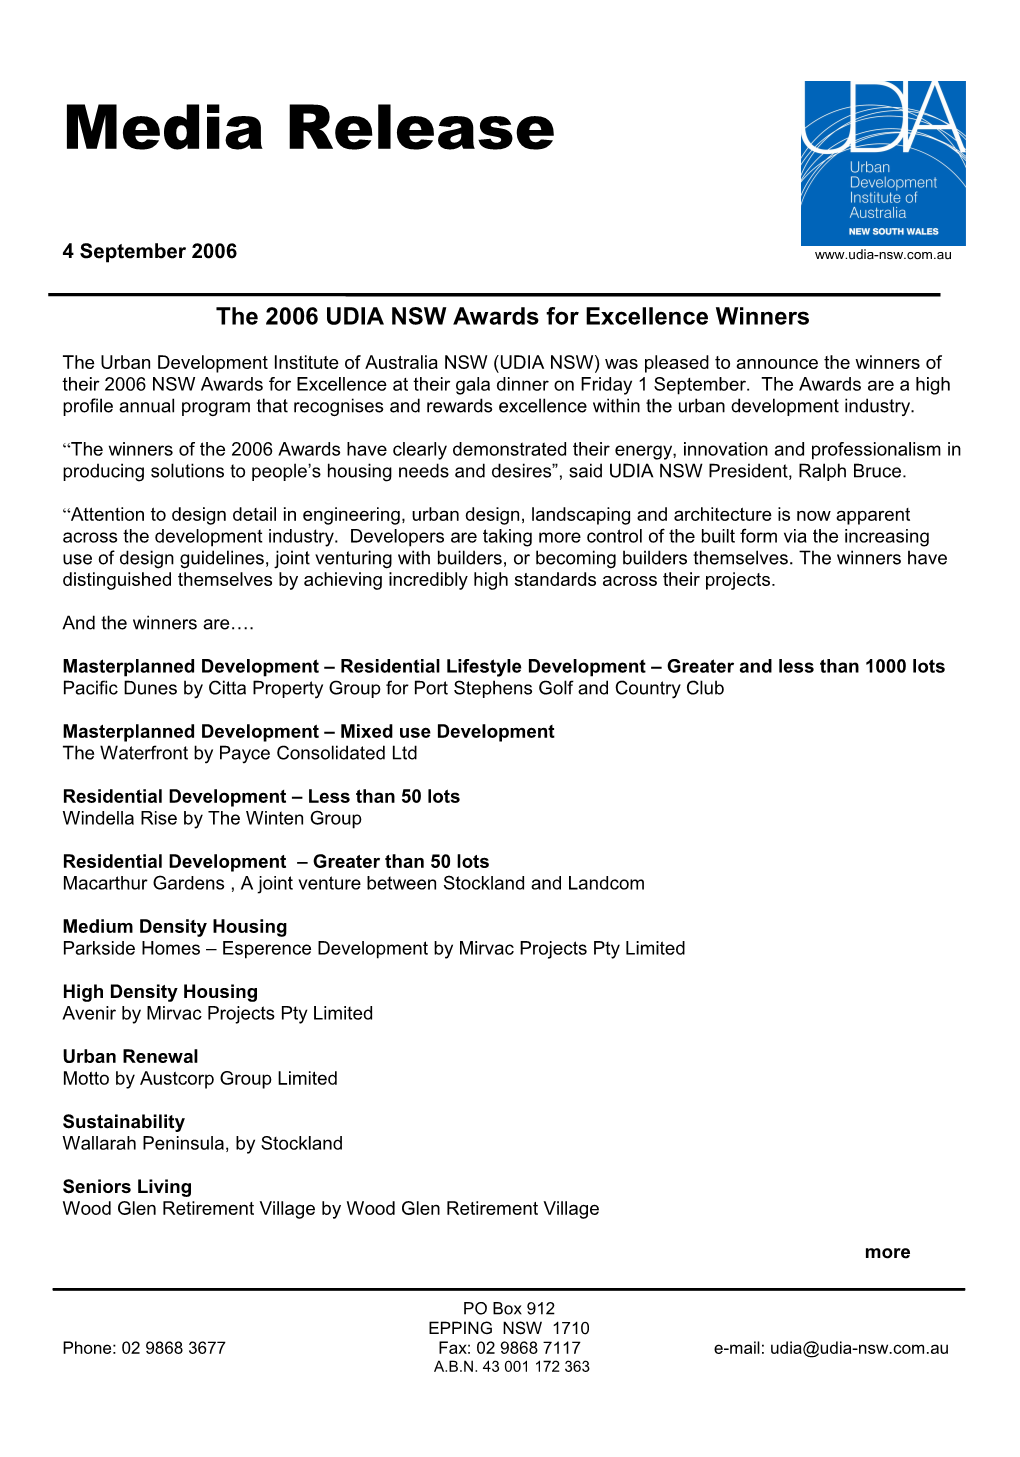 The 2006 UDIA NSW Awards for Excellence Winners